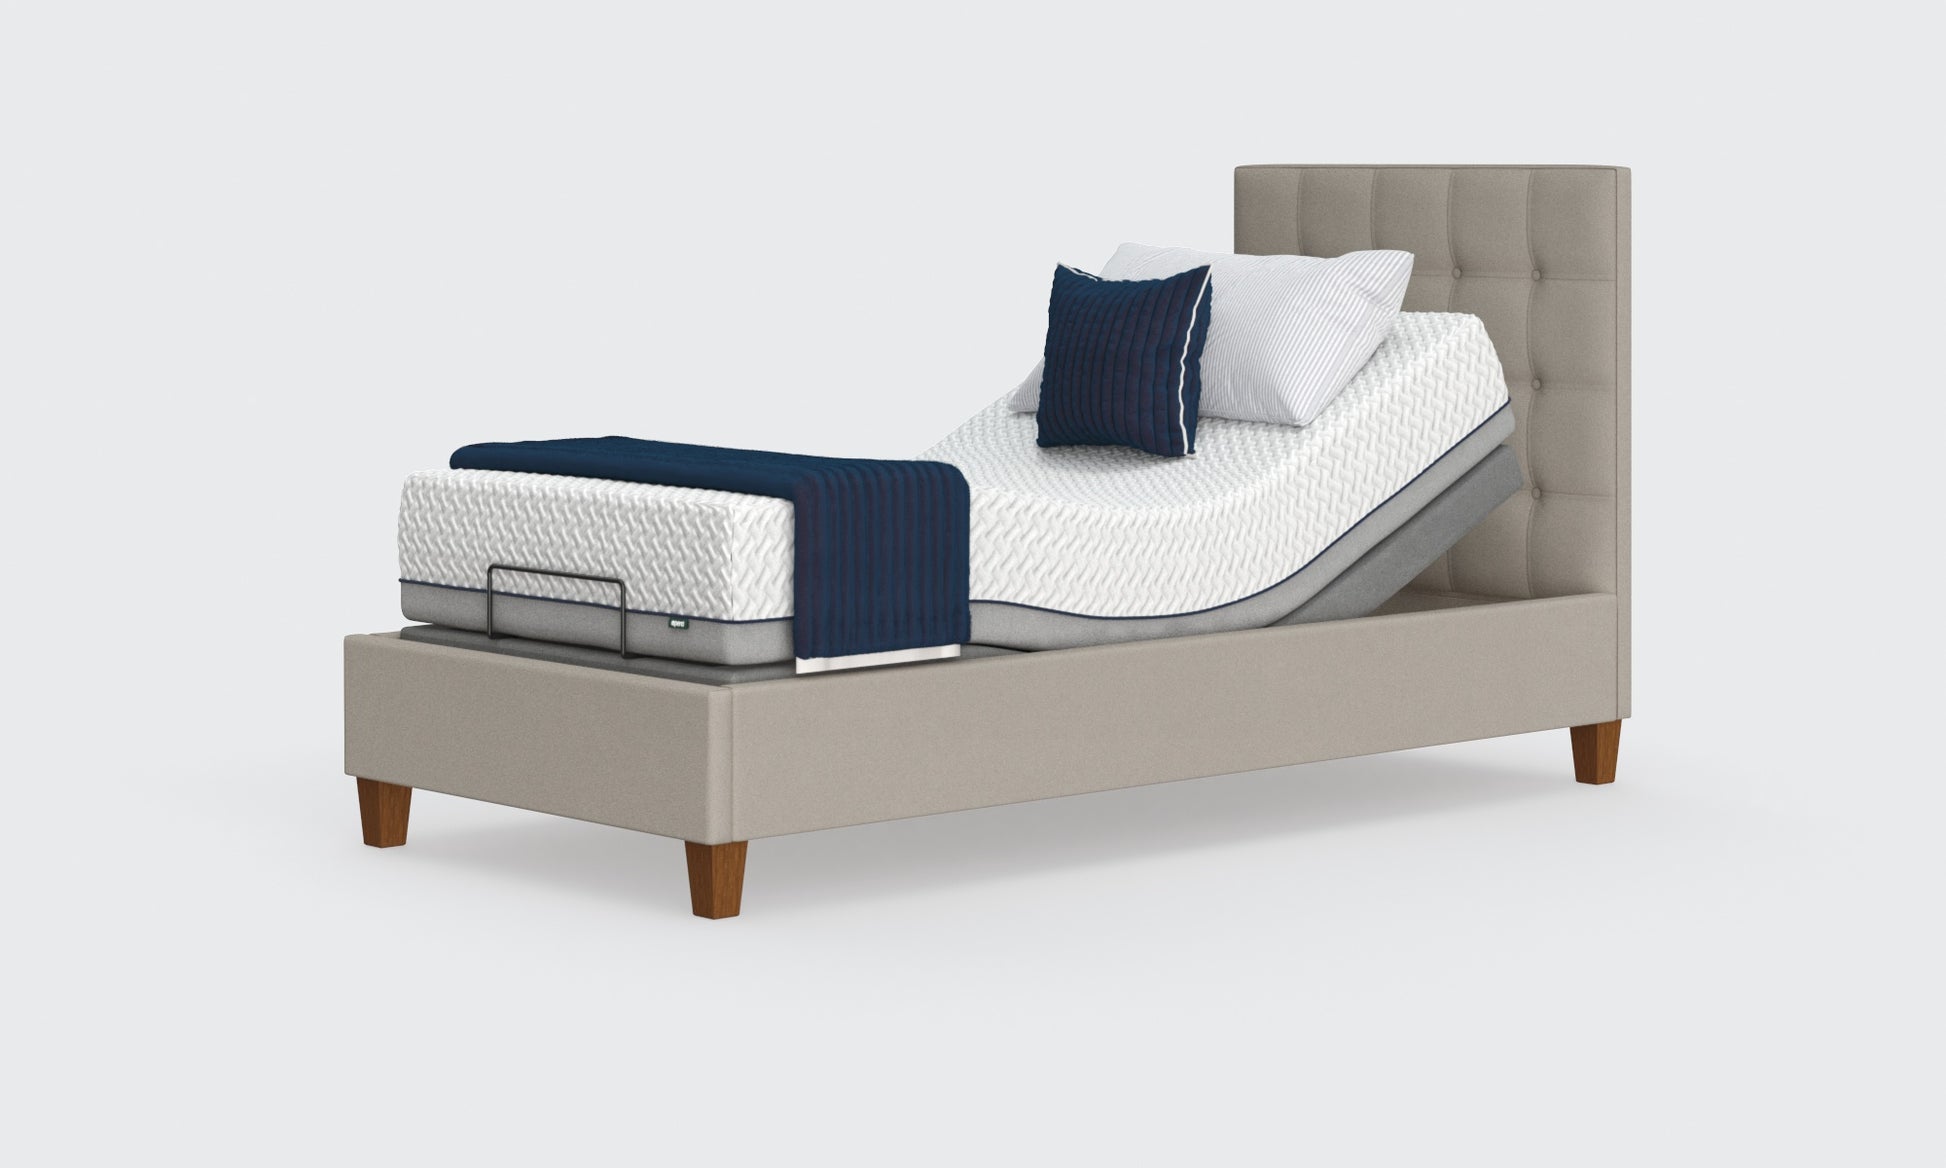 flyte shallow 3ft bed in the linen material with an emerald headboard